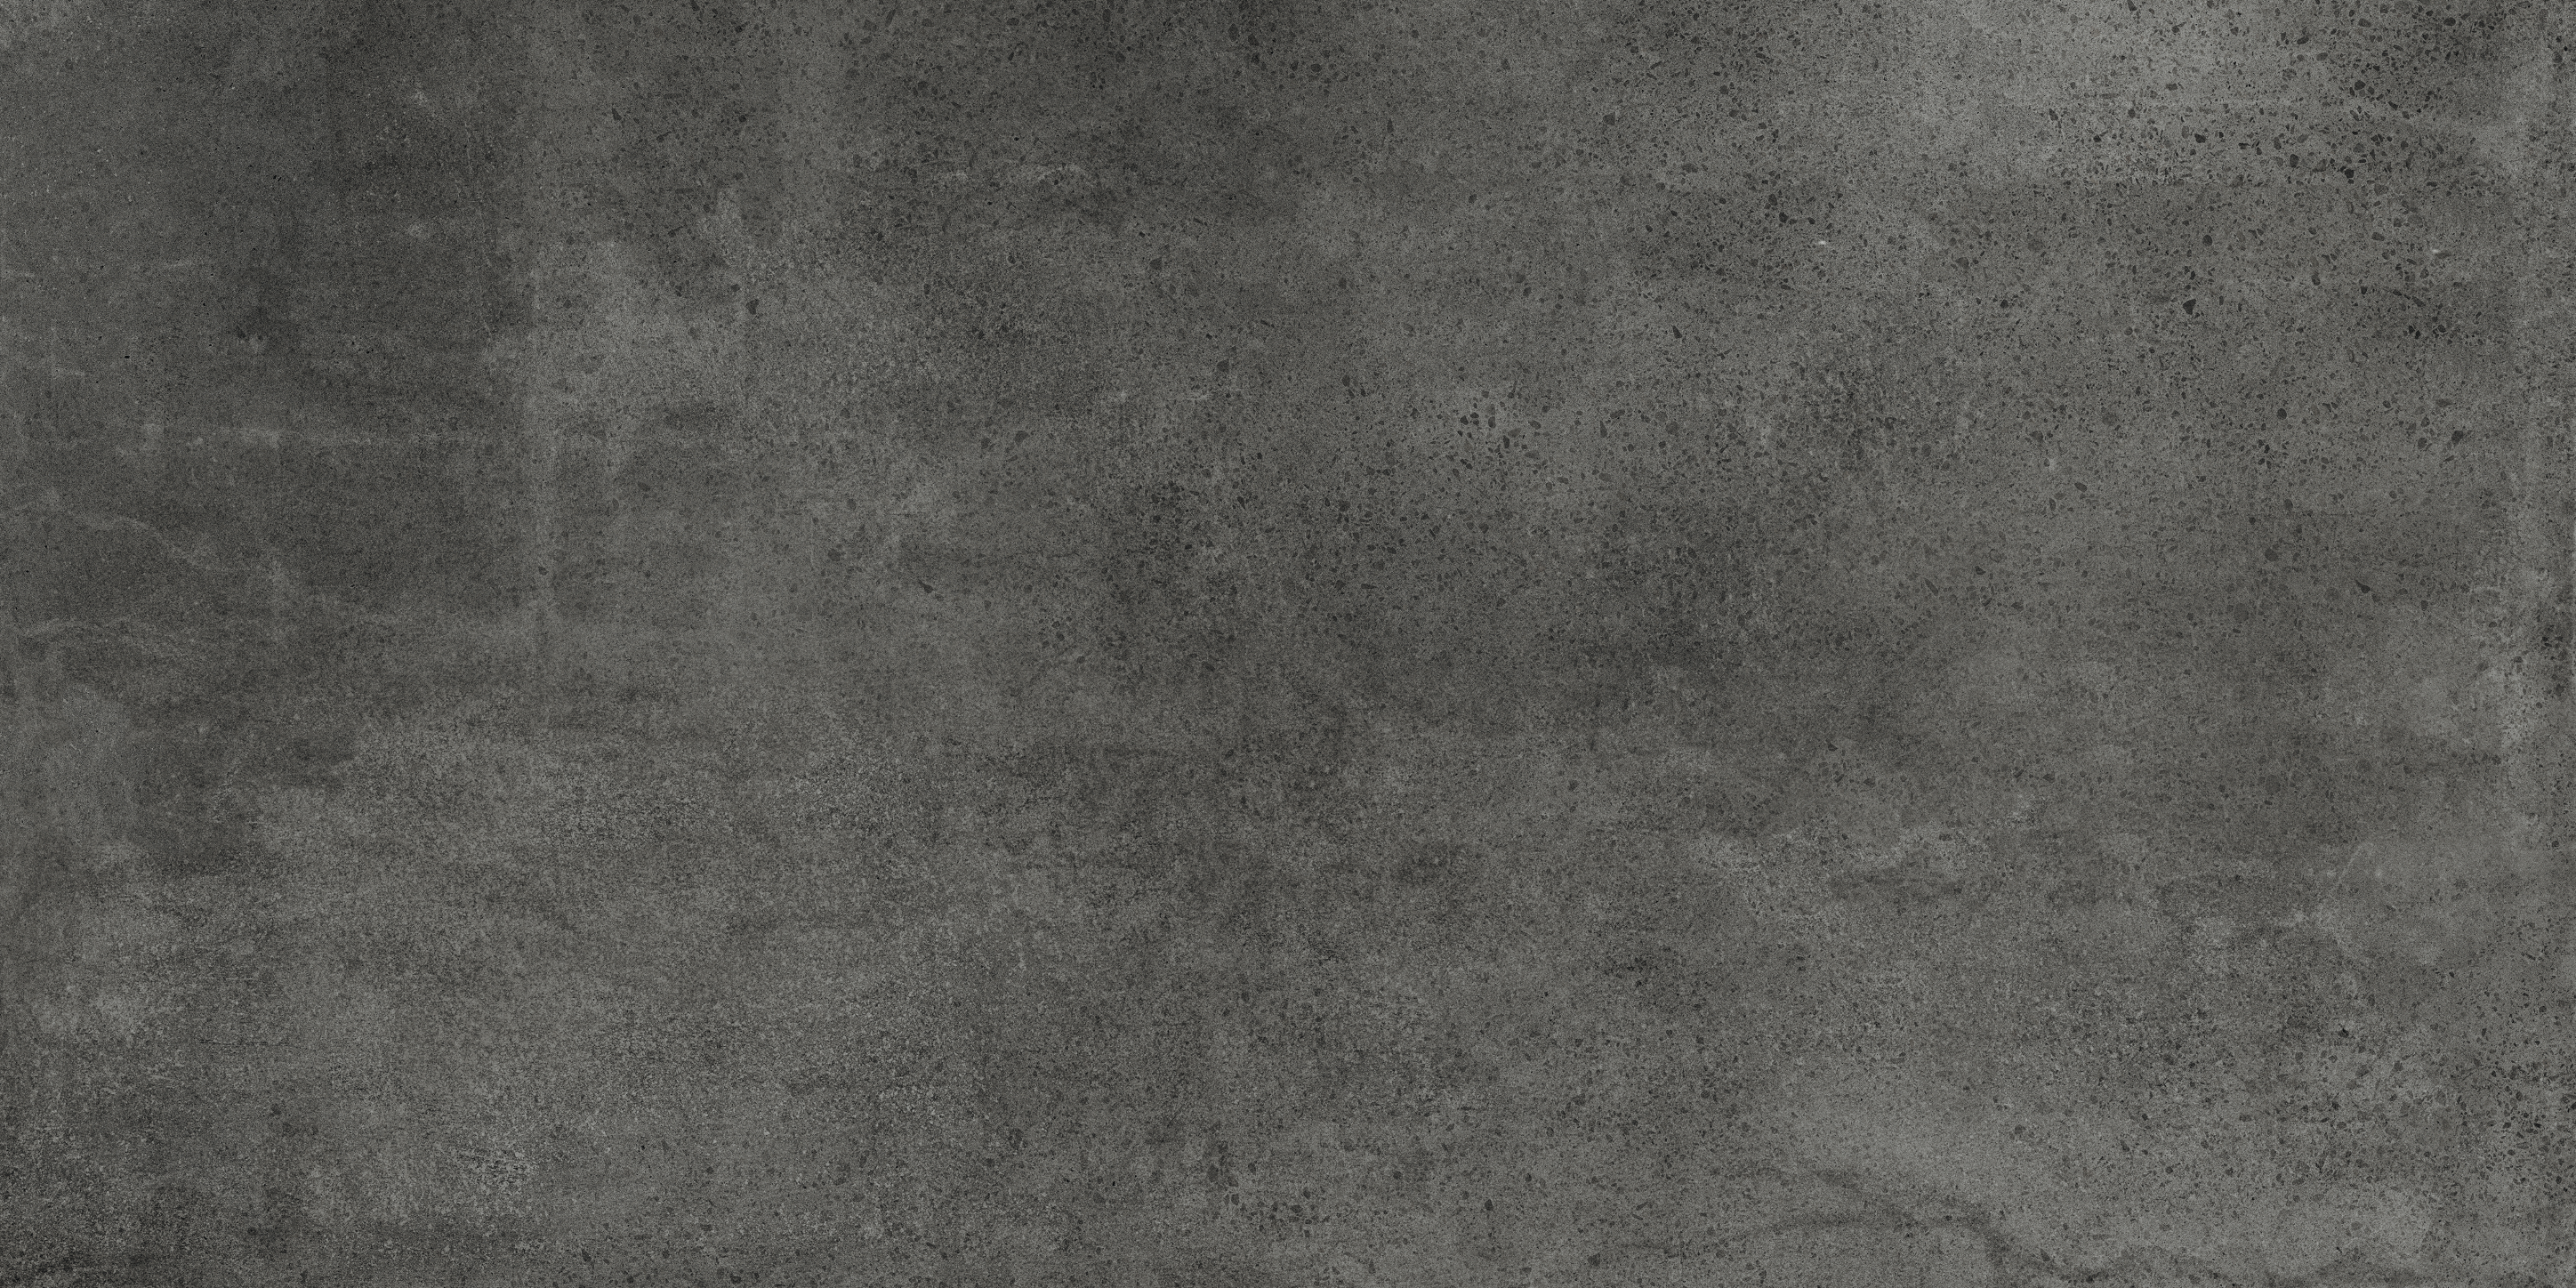 graphite pattern color body porcelain field tile from industria anatolia collection distributed by surface group international matte finish rectified edge 24x48 rectangle shape